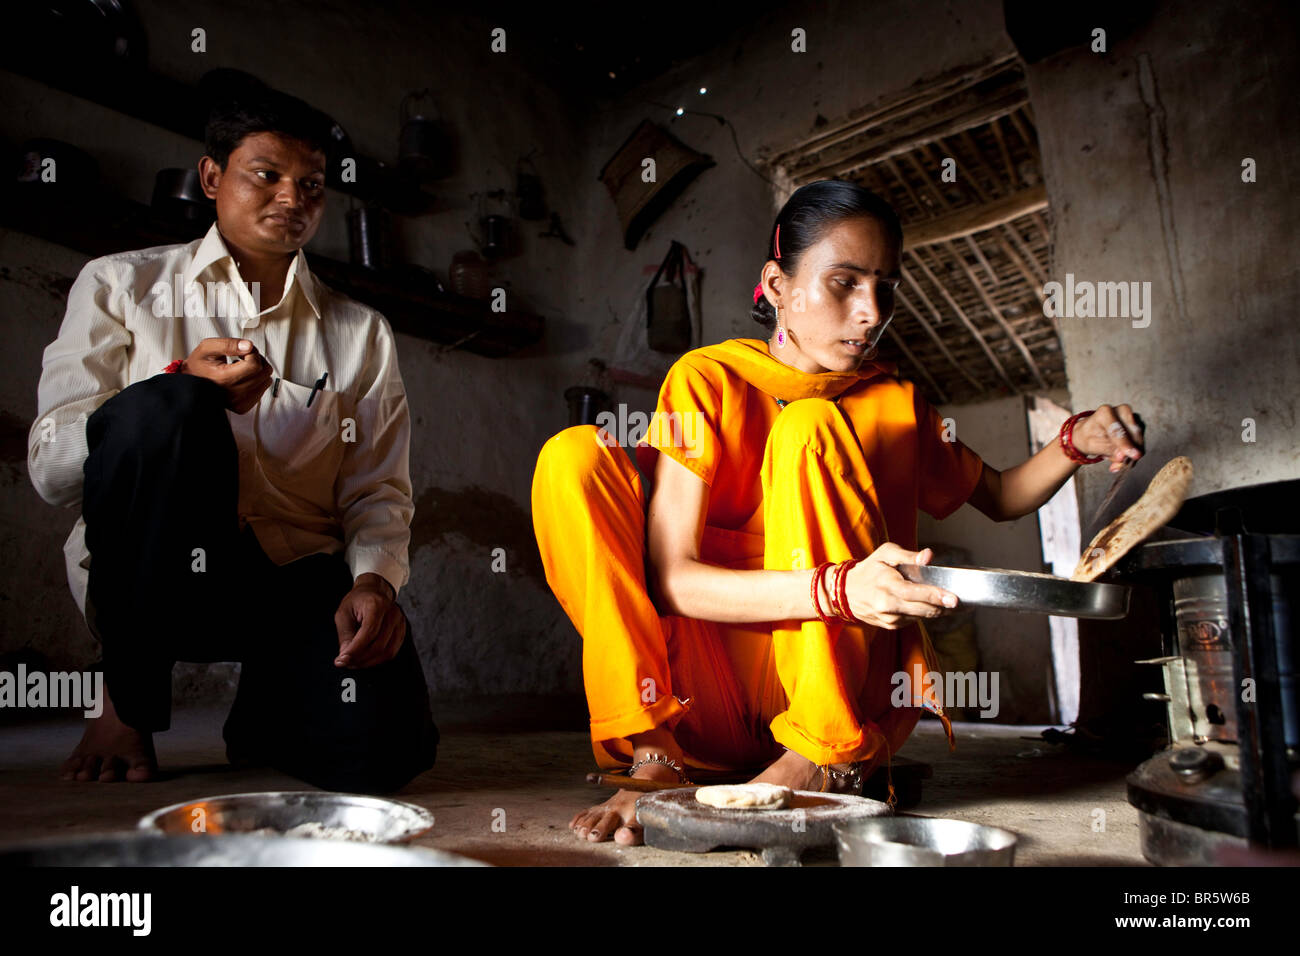 16-year-old Hansa who is deaf and blind, learning to cook. Deepak is trained by Sense International in Ahmadabad, India. Stock Photo